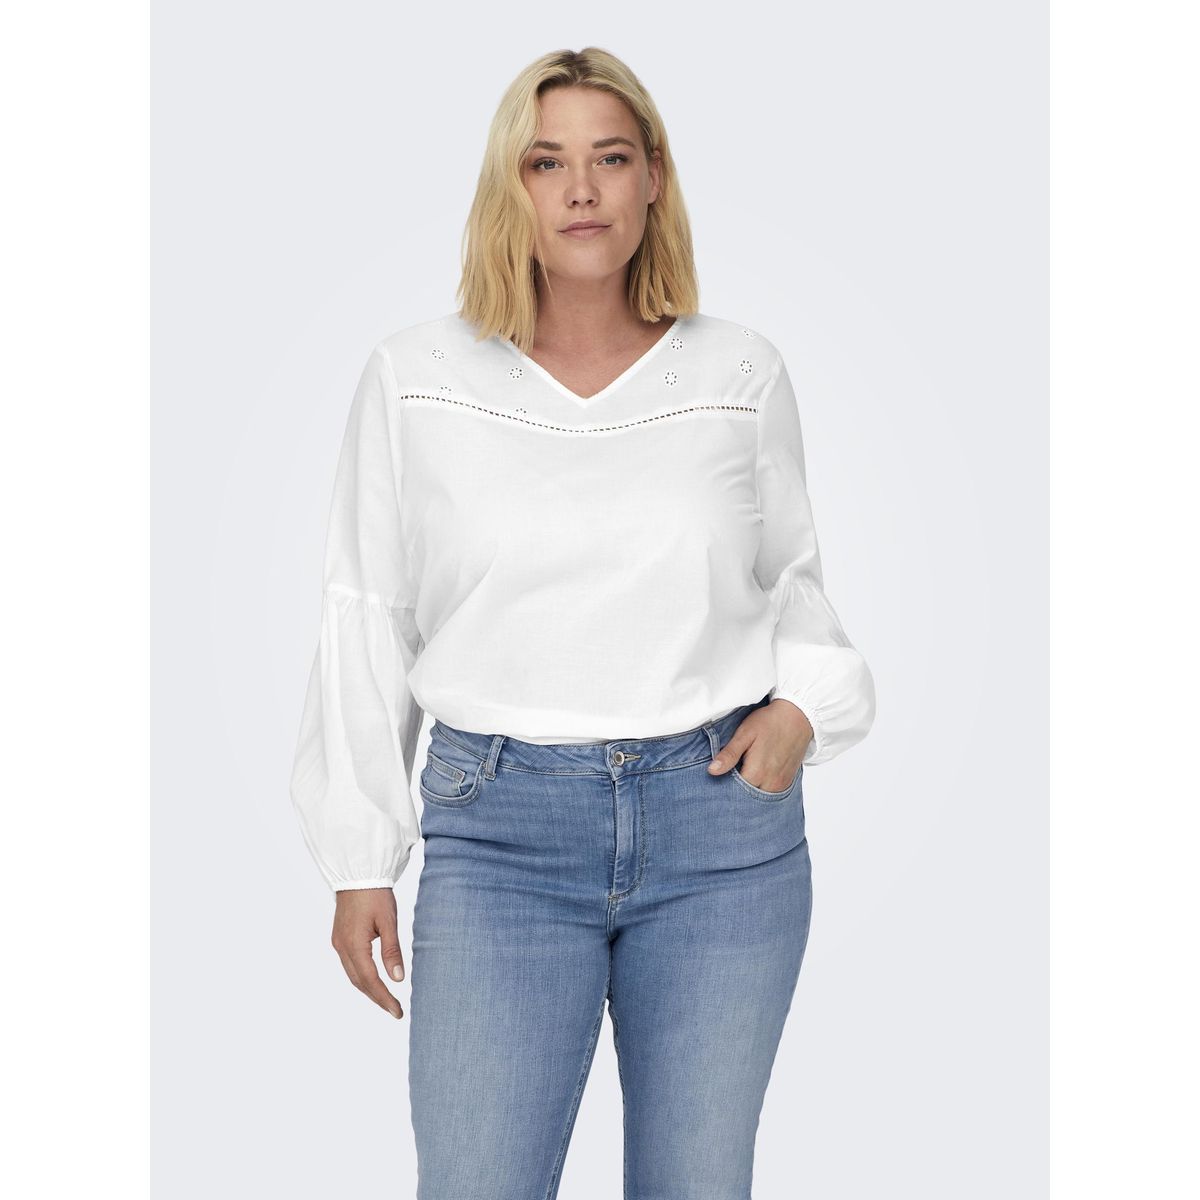 Top carchalinos l/s La top wvn Carmakoma Only | Redoute